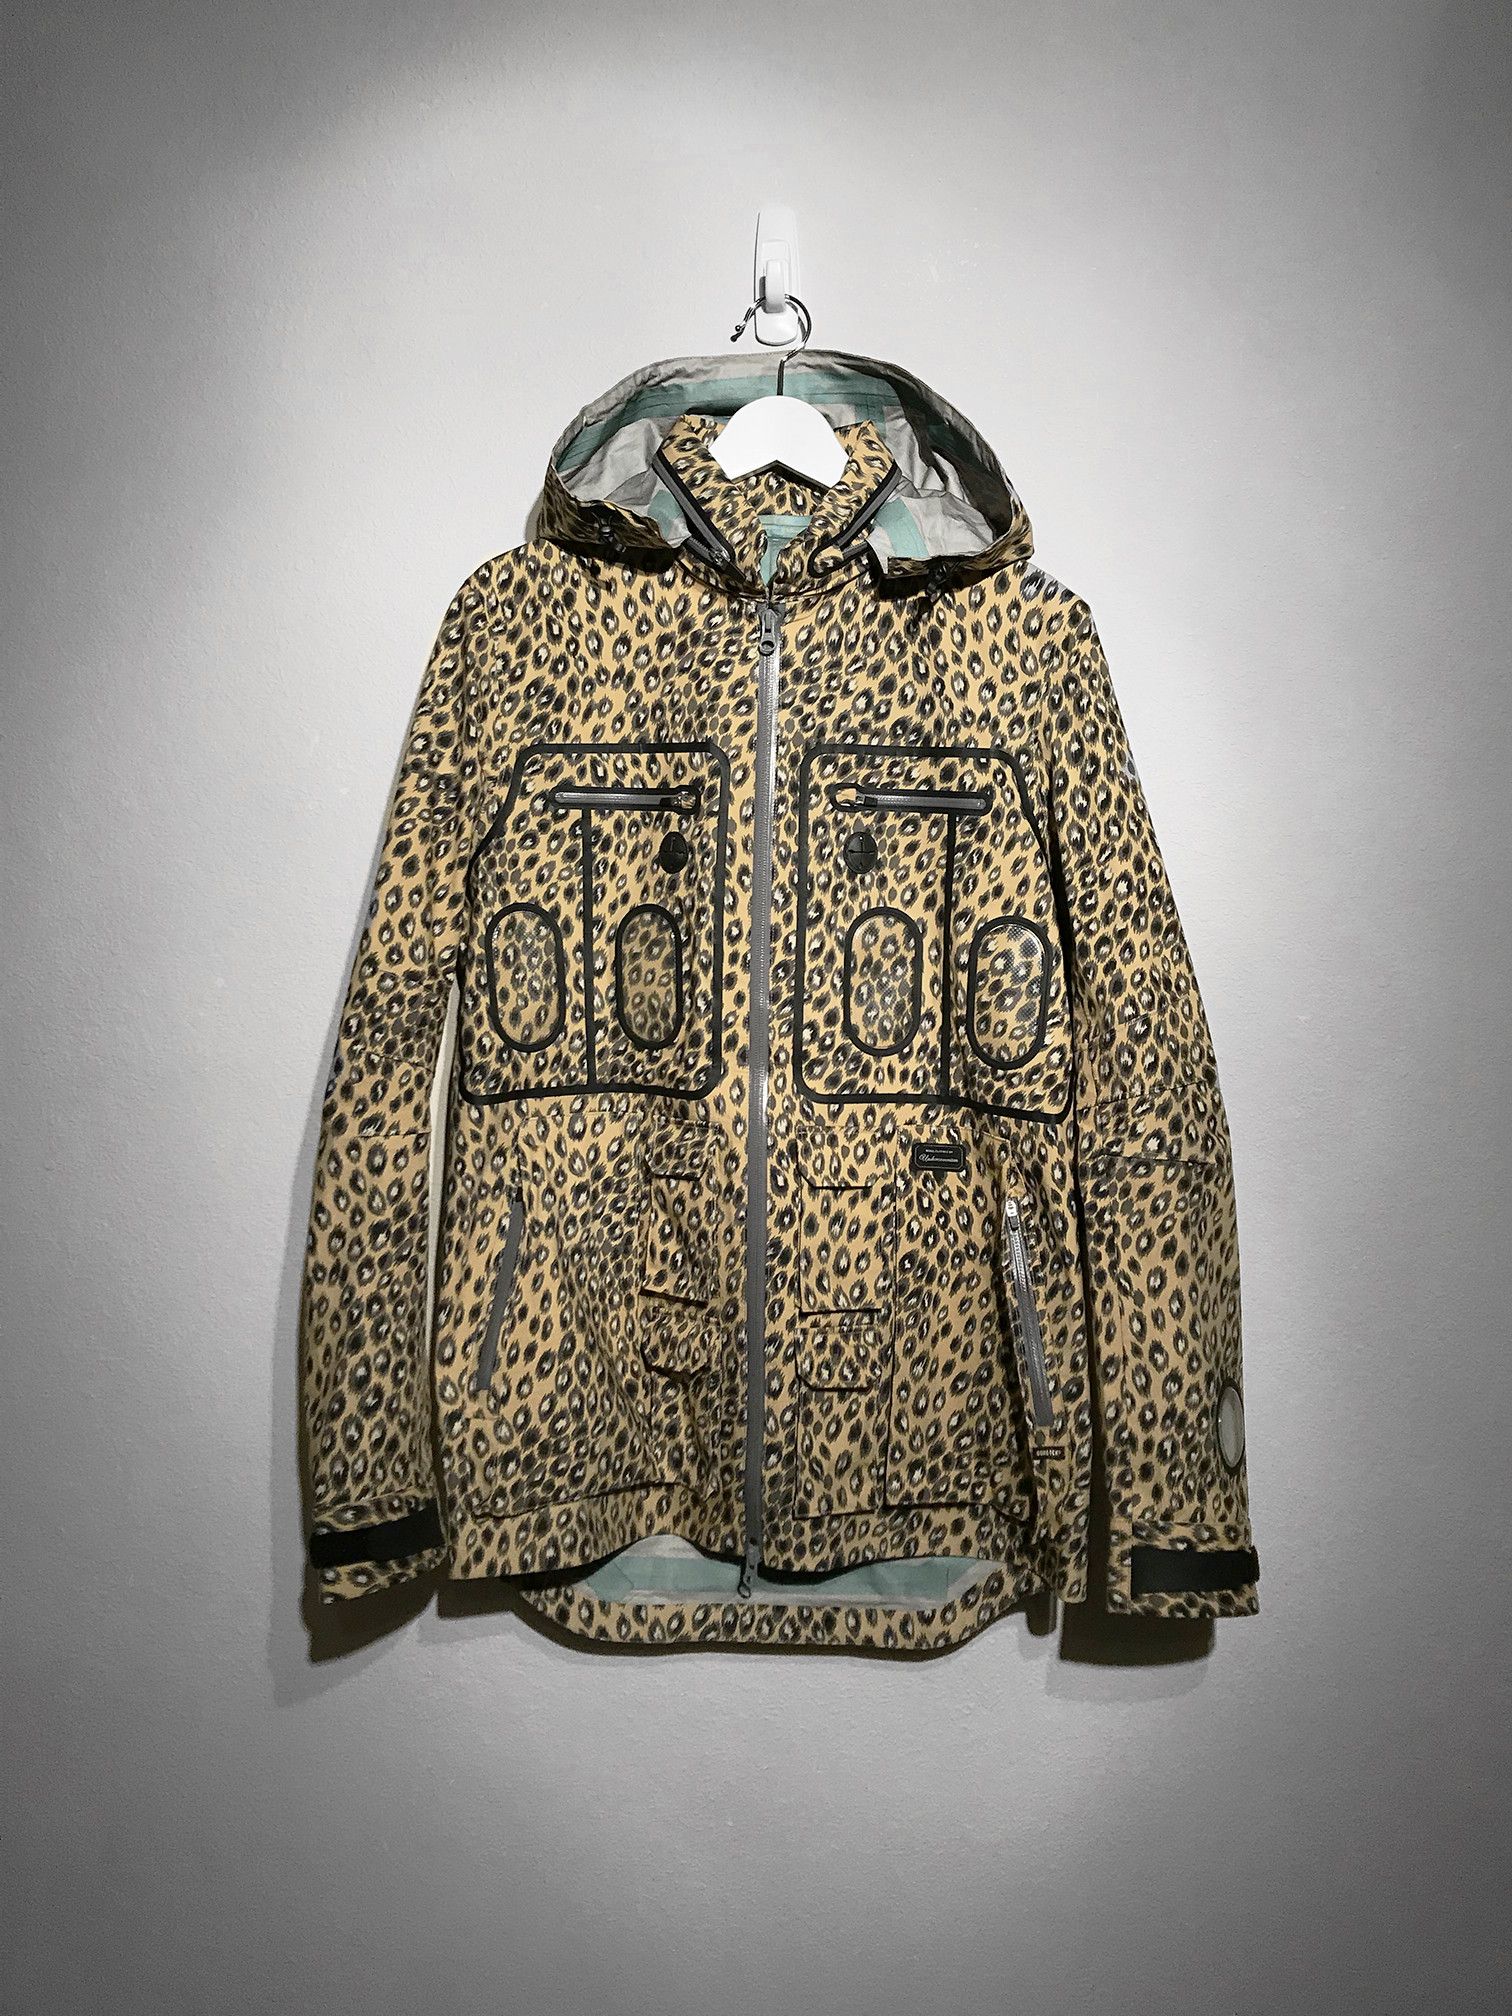 Undercover 09SS Leopard Print Gore-Tex size 3 | Grailed